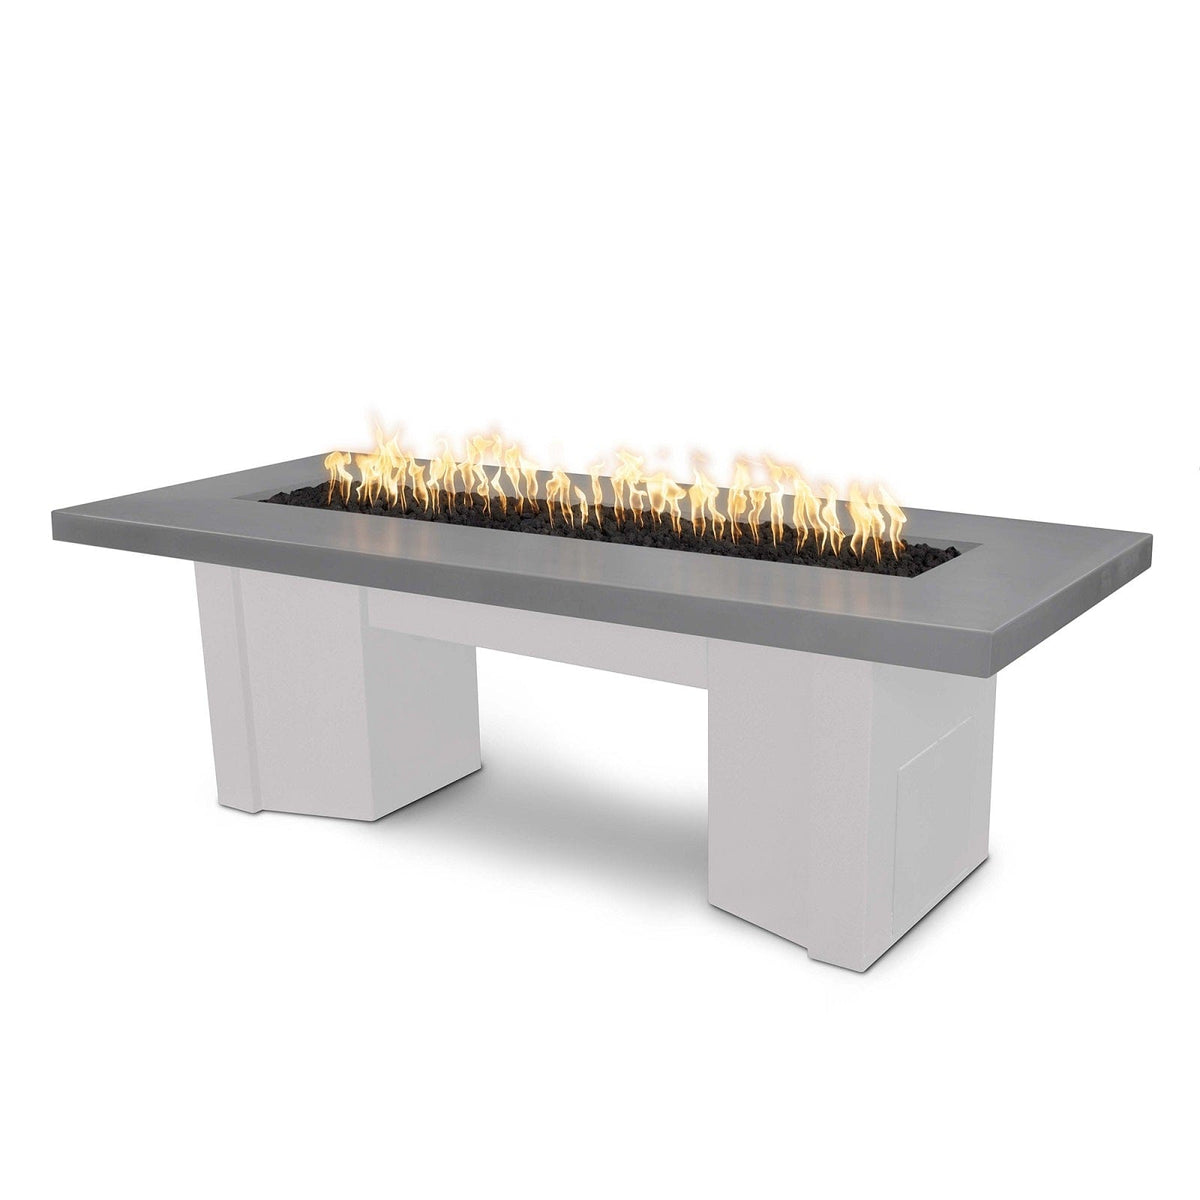 The Outdoor Plus Fire Features Natural Gray (-NGY) / White Powder Coated Steel (-WHT) The Outdoor Plus 78&quot; Alameda Fire Table Smooth Concrete in Liquid Propane - Flame Sense System with Push Button Spark Igniter / OPT-ALMGFRC78FSEN-LP